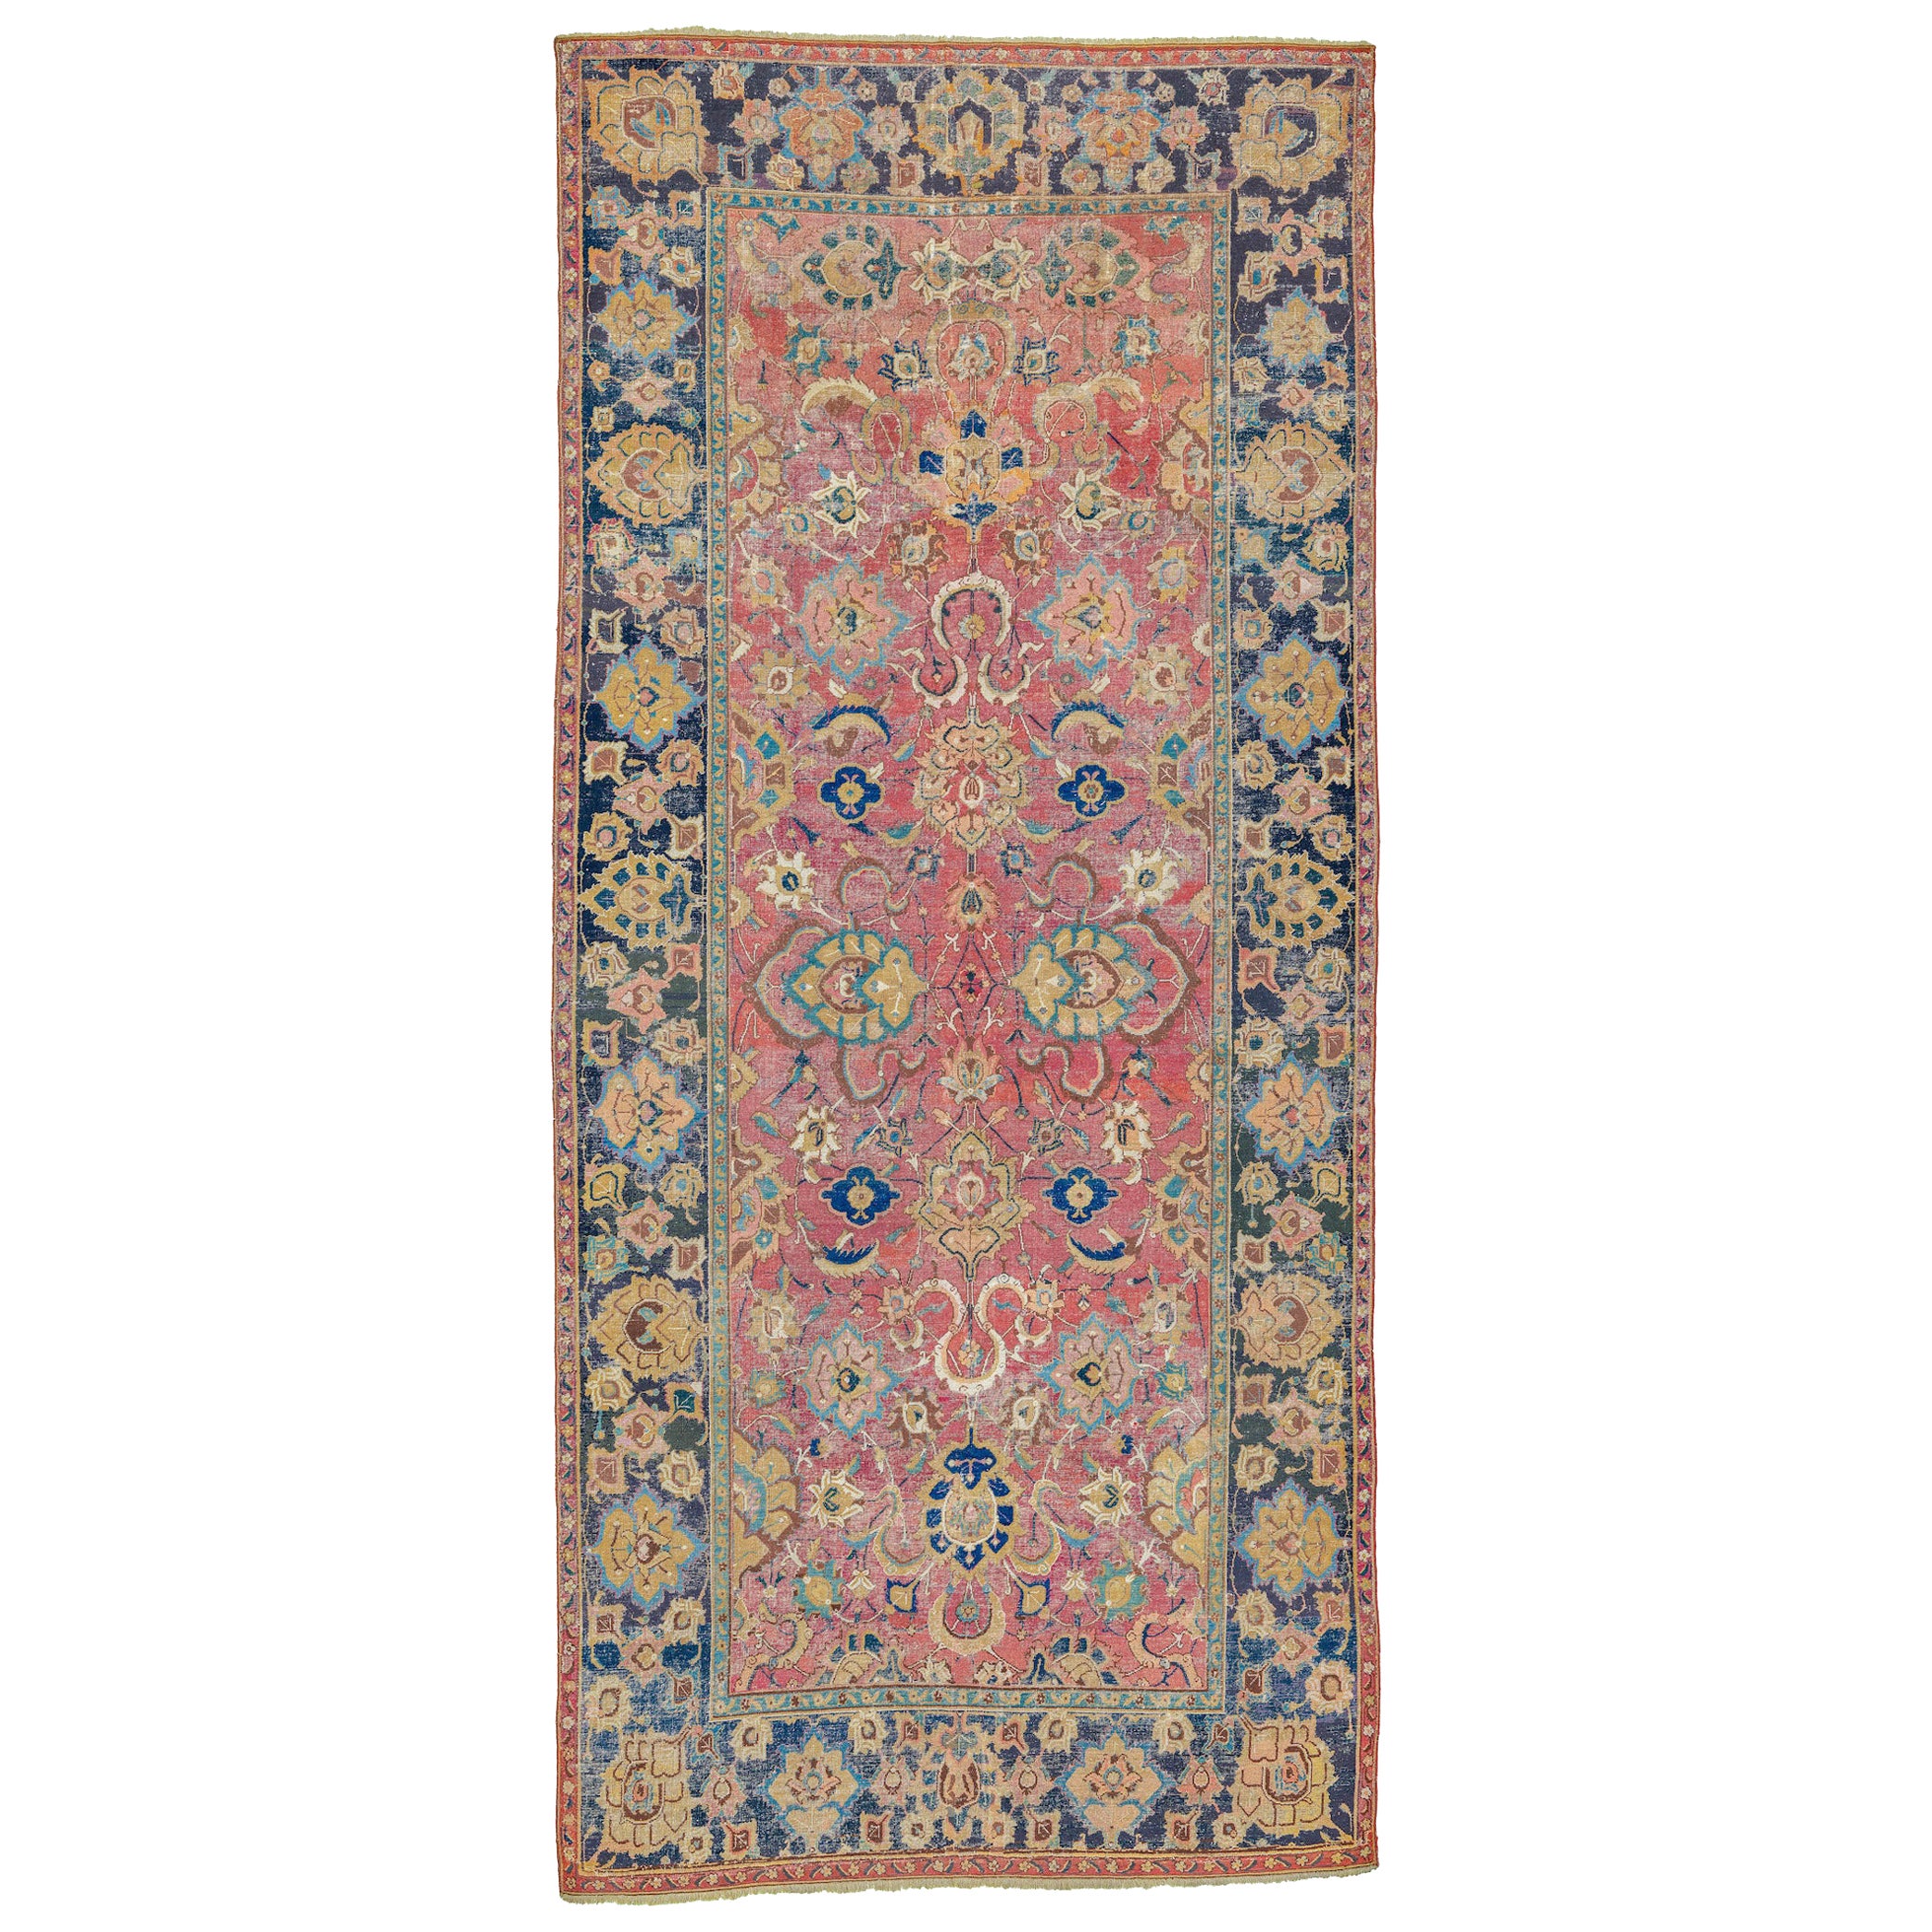 Antique Indo-Isfahan Long Rug, 17th Century